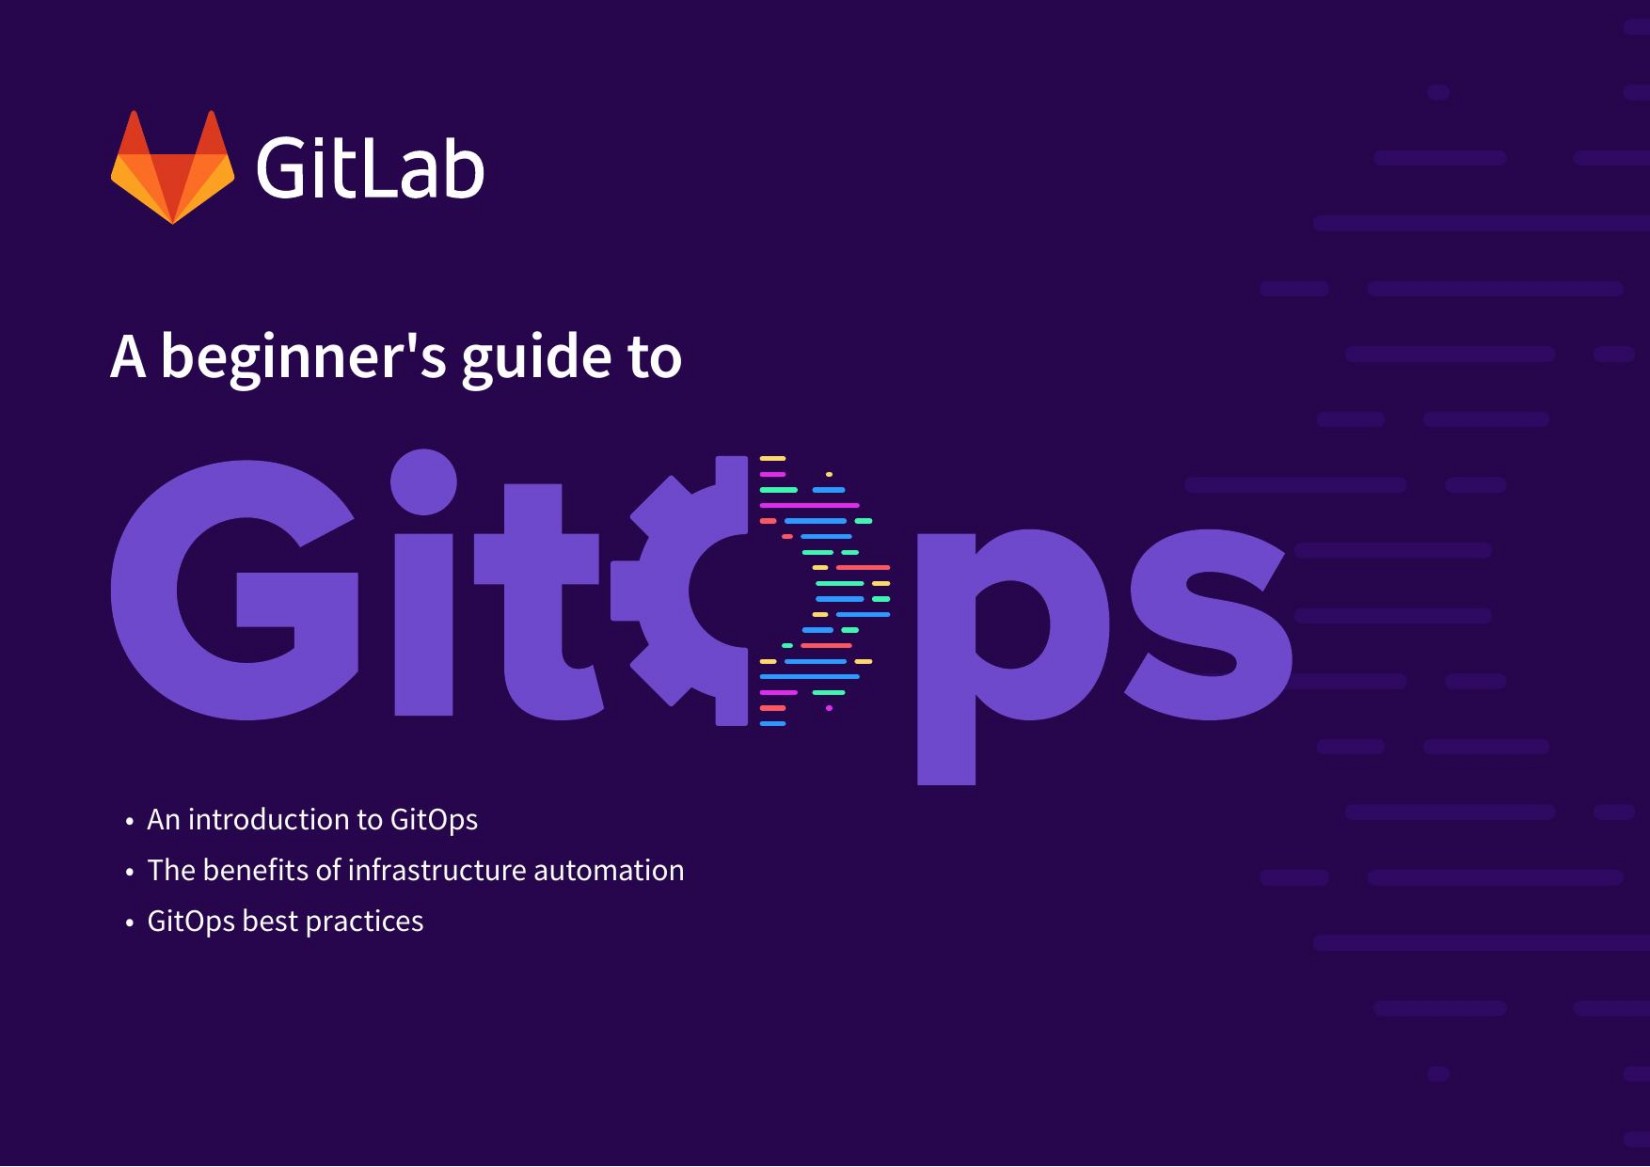 A Beginner's guide to GitOps